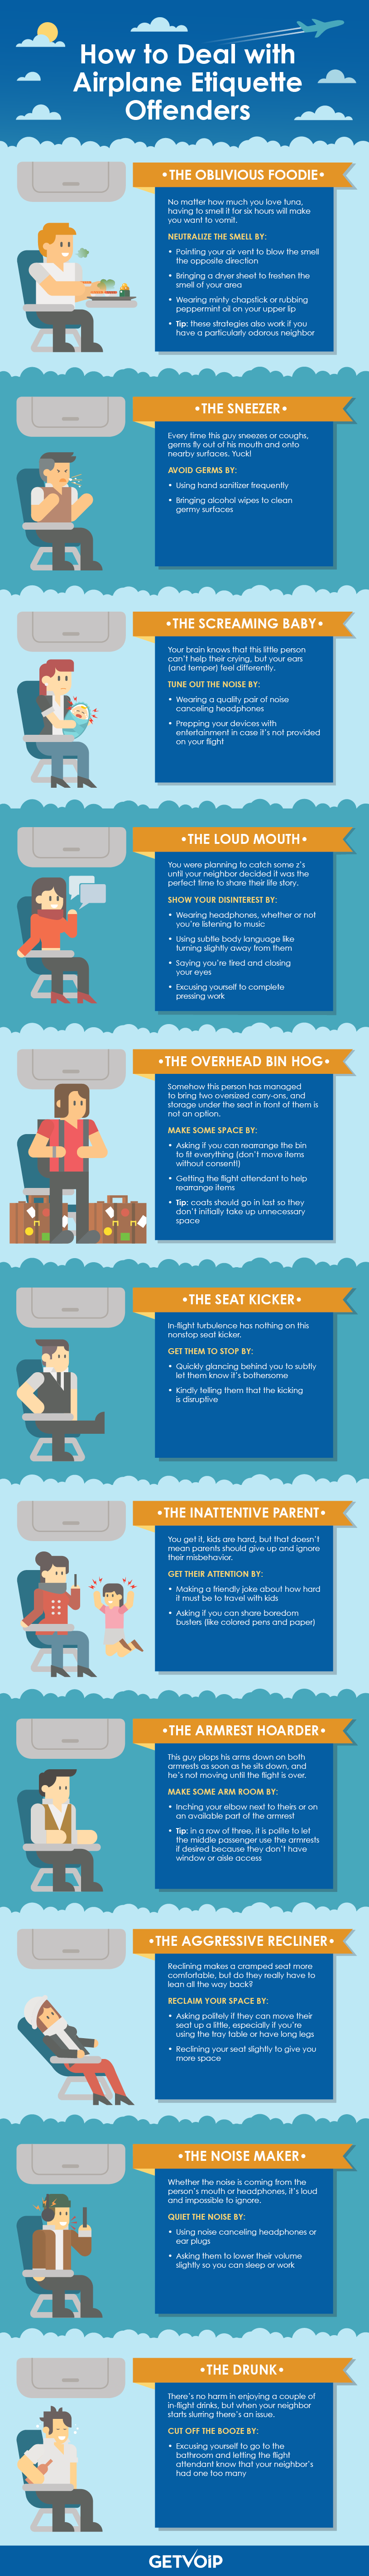 11 Types of Airplane Etiquette Offenders and How to Manage Them - Infographic